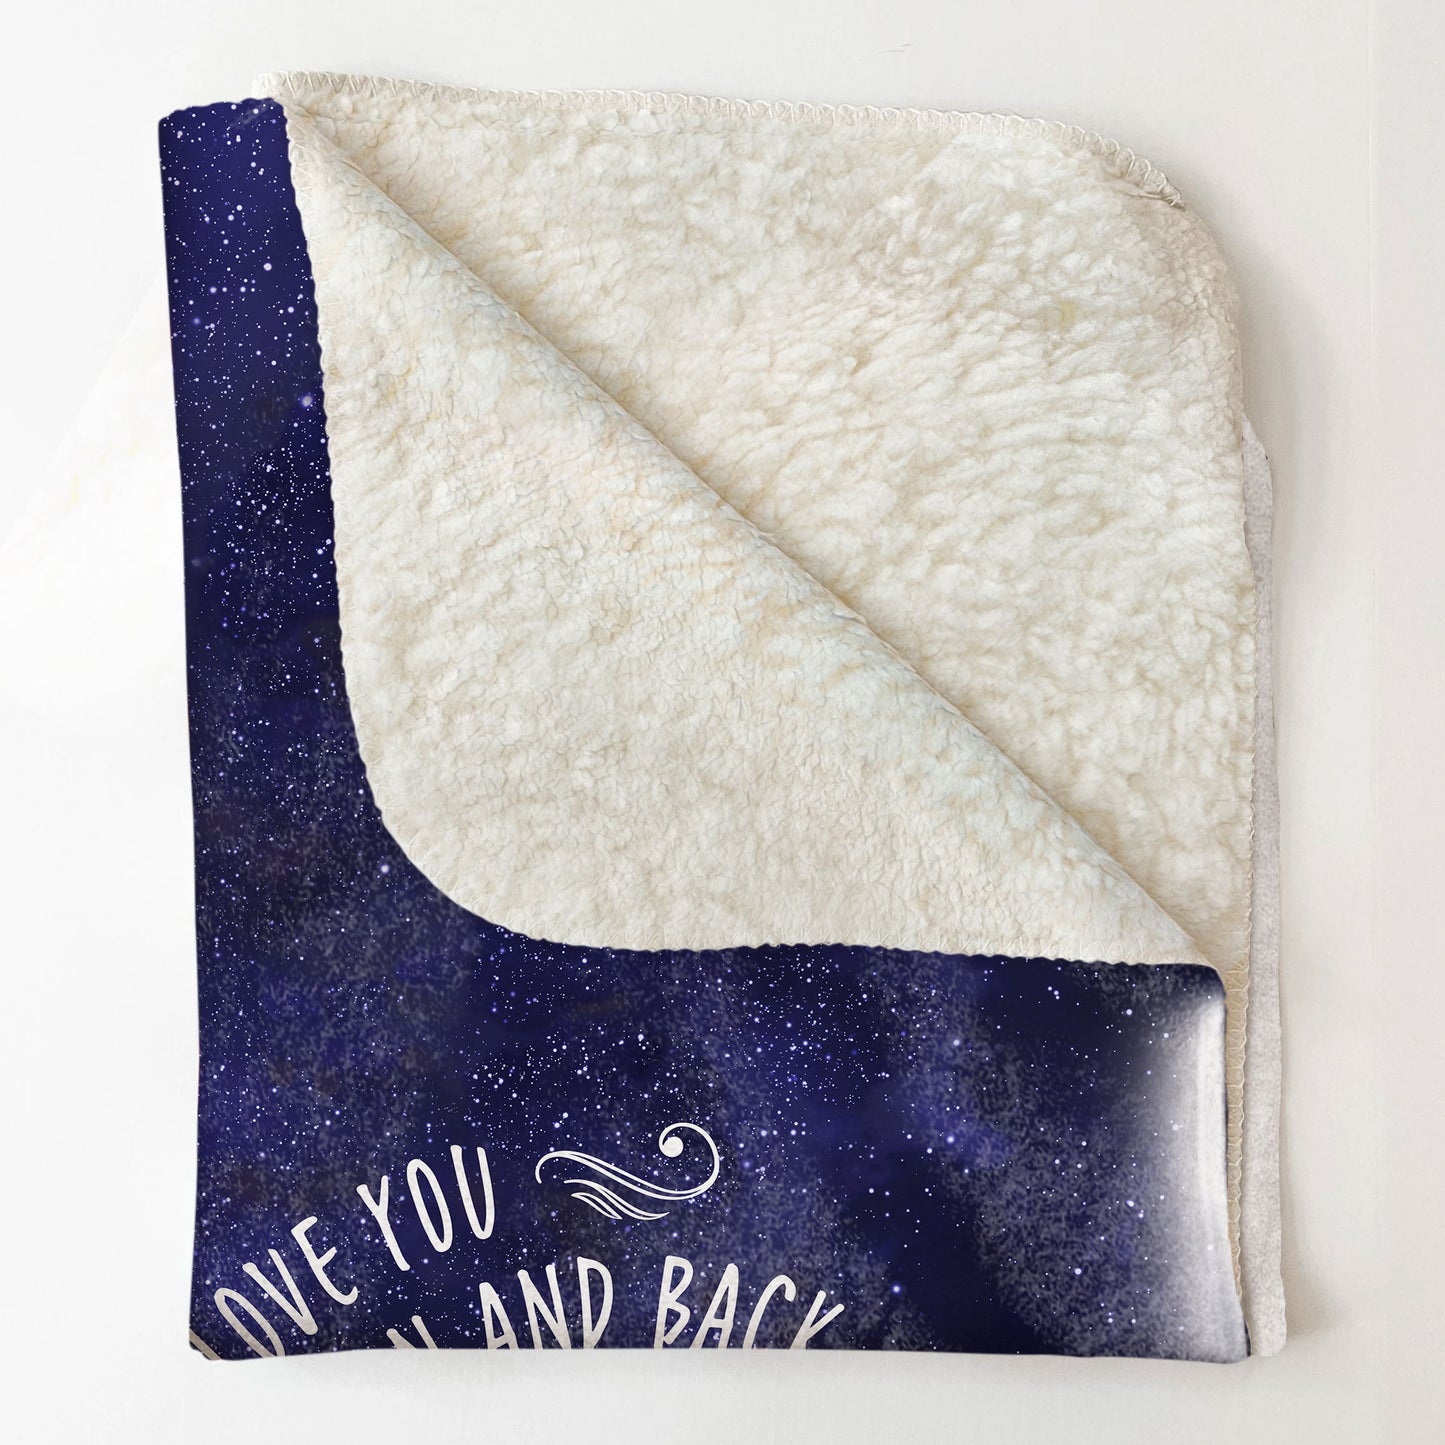 I Love You To The Moon And Back - Personalized Blanket - Birthday, Loving Gift For Couple, Boyfriend, Girlfriend, Husband, Wife